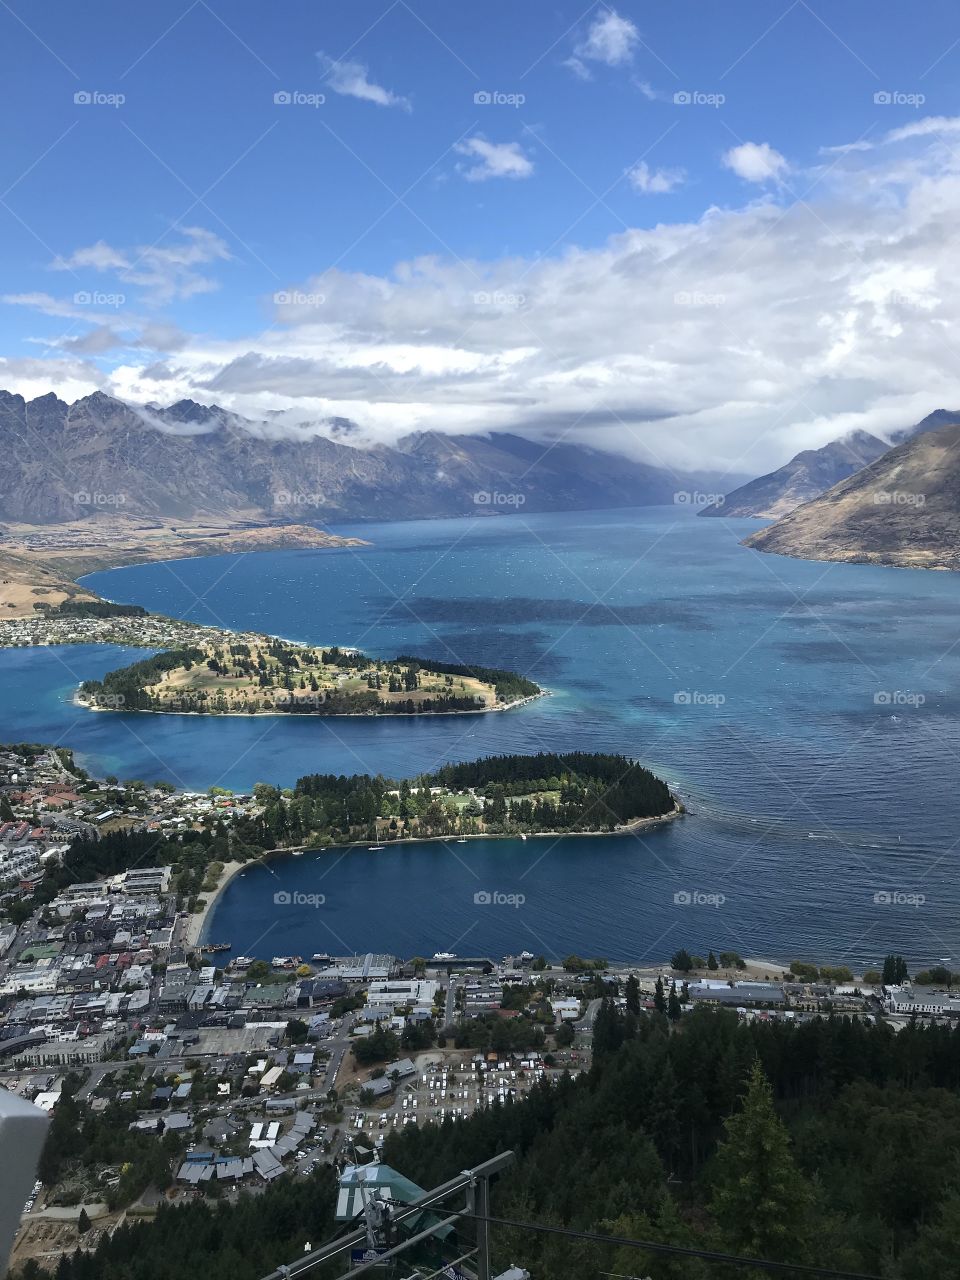 Beautiful mountain top views of the city and water in Christchurch NZ